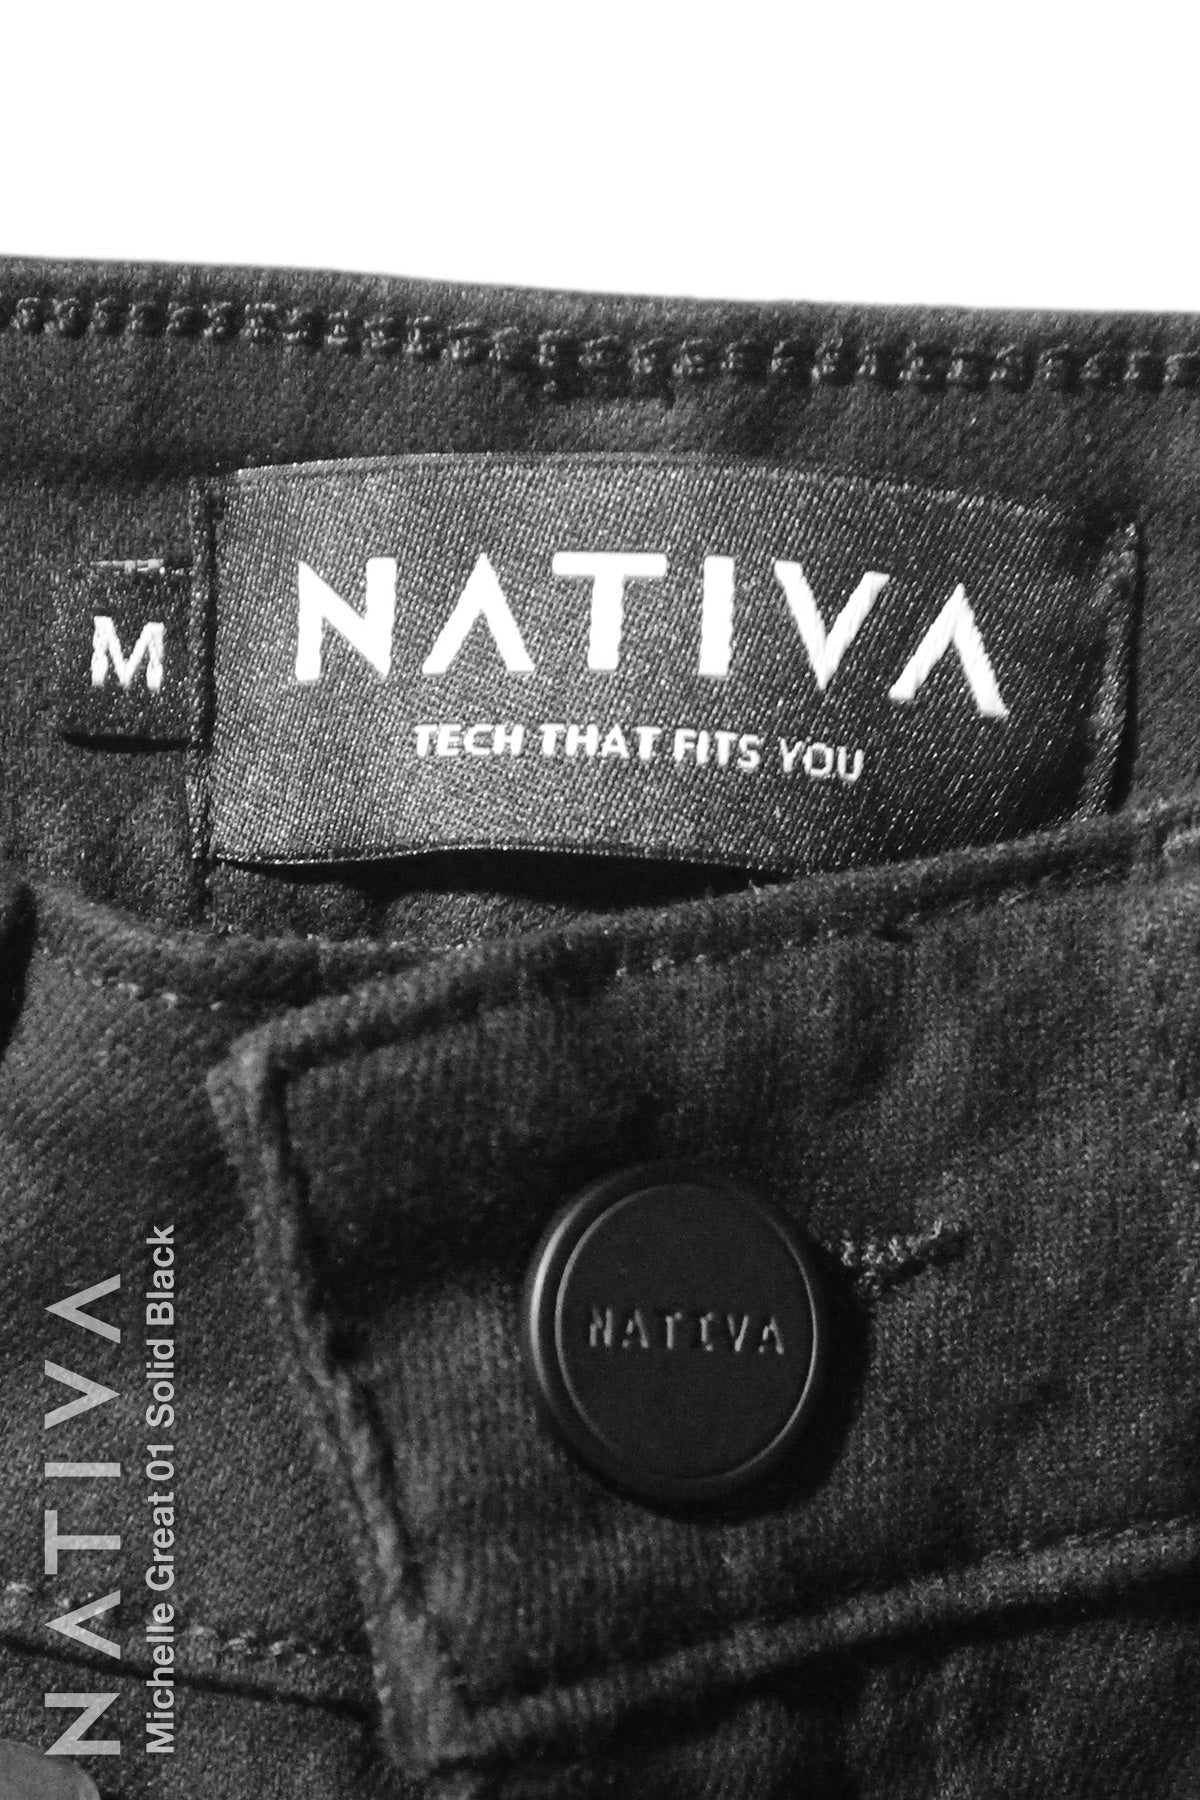 NATIVA, STRETCH JEANS. MICHELLE GREAT 01 BLACK, High Shaping Capacity, All-Season Wear, Hi-Rise Super Skinny Jeans